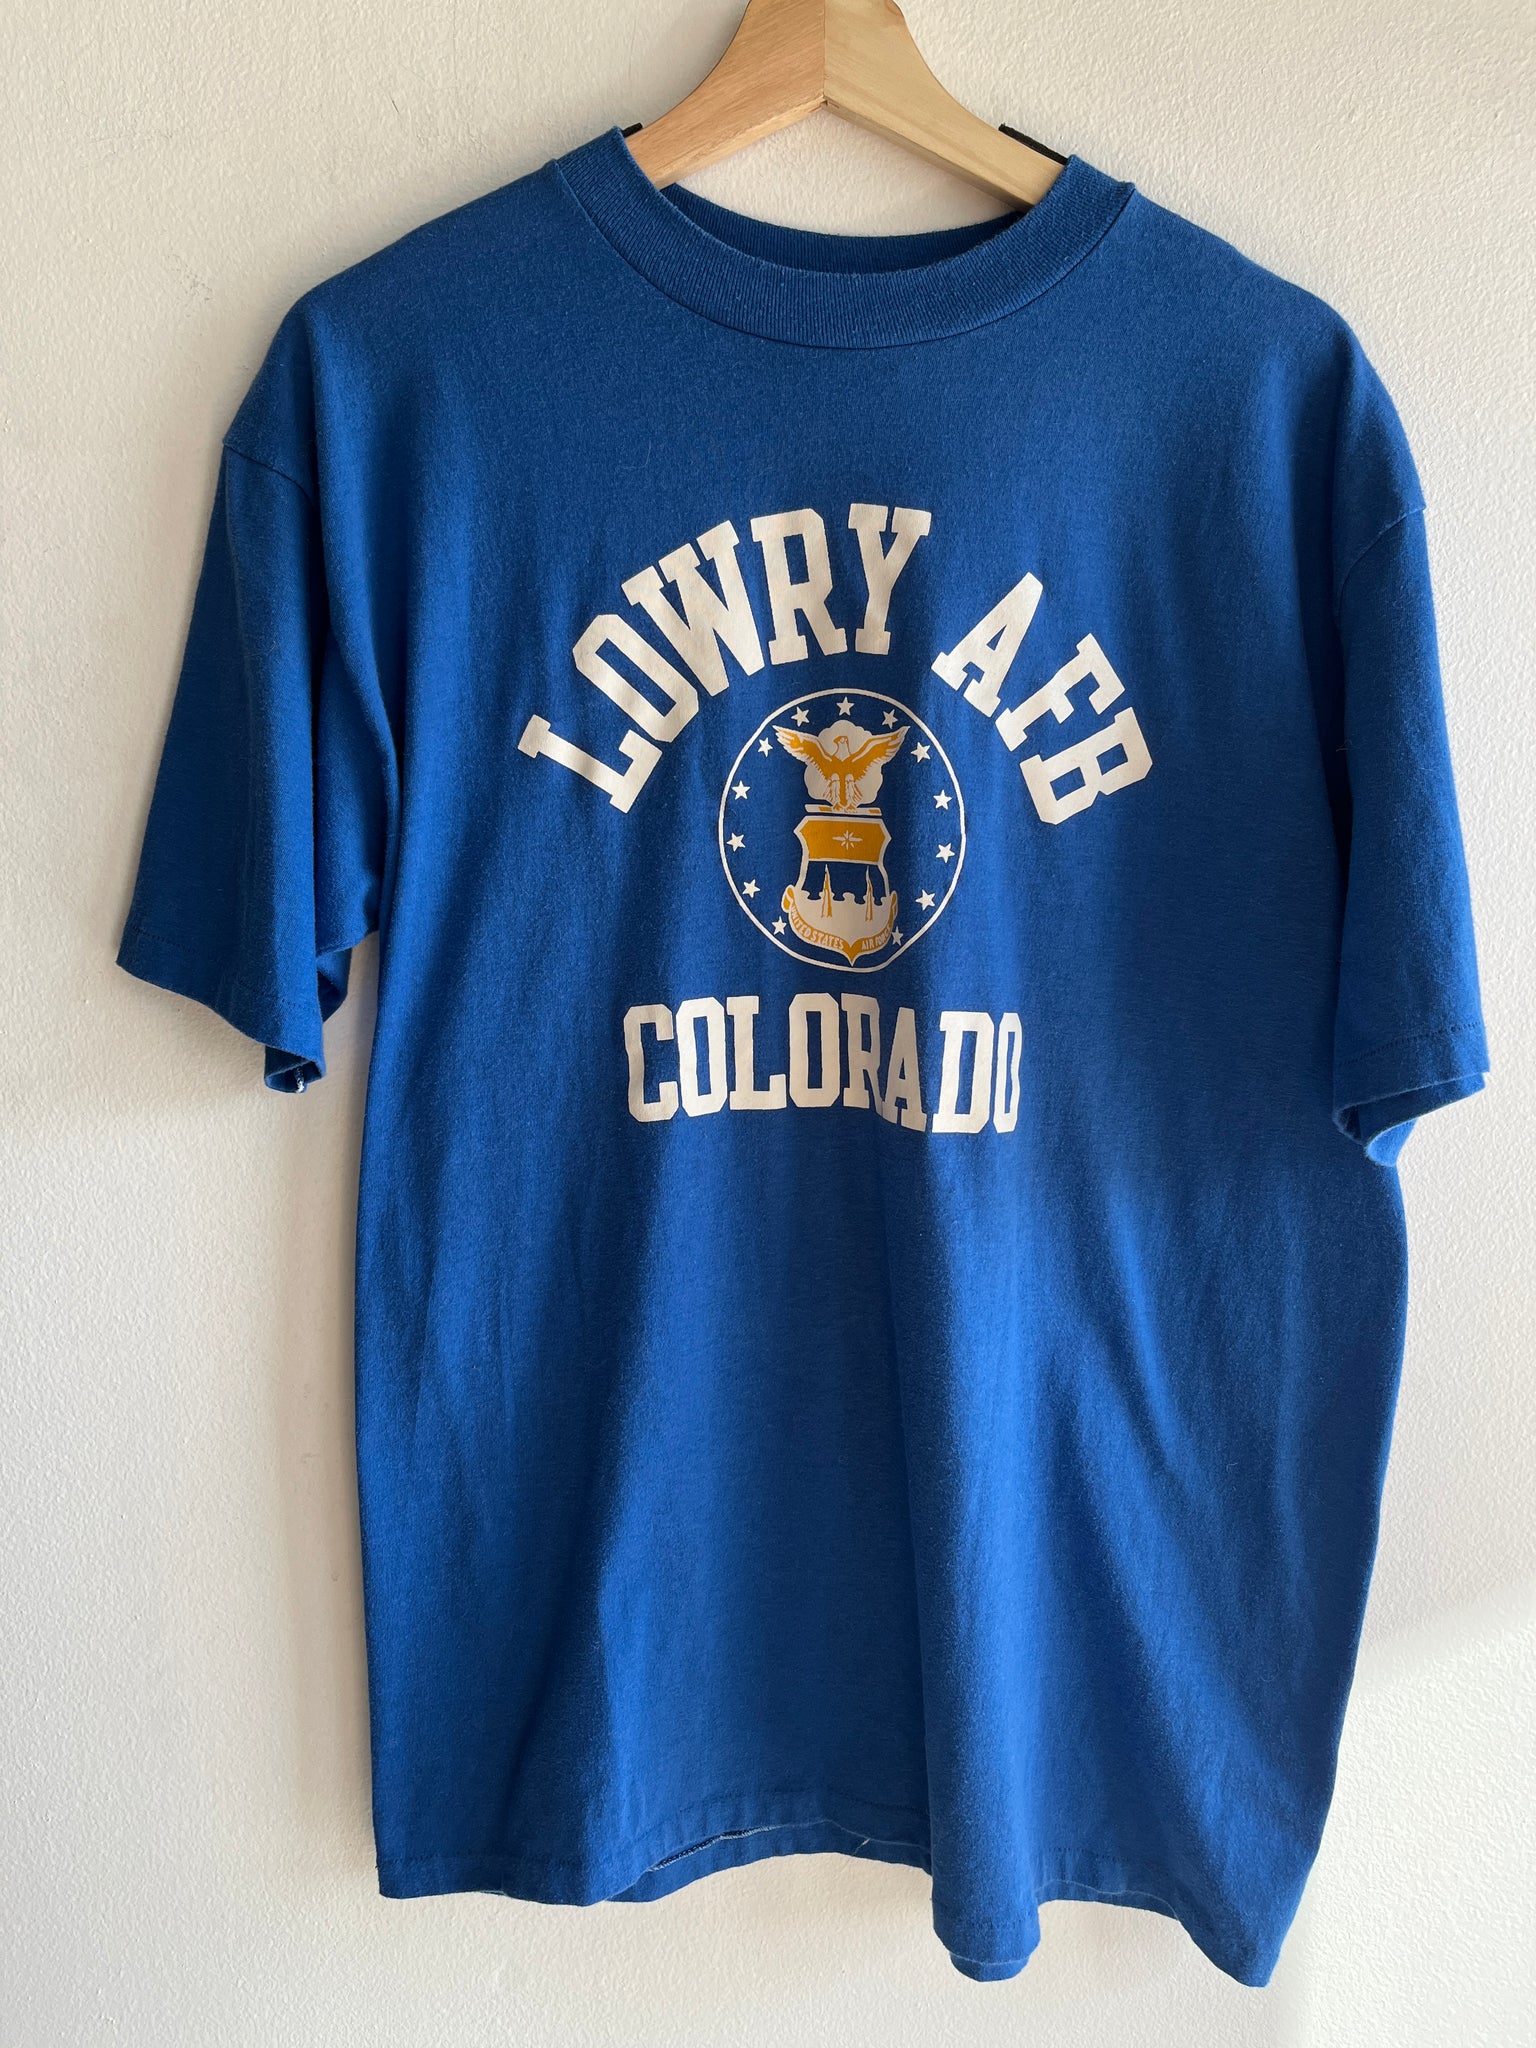 Vintage 1970/80’s Lowry Air Force Base T-Shirt